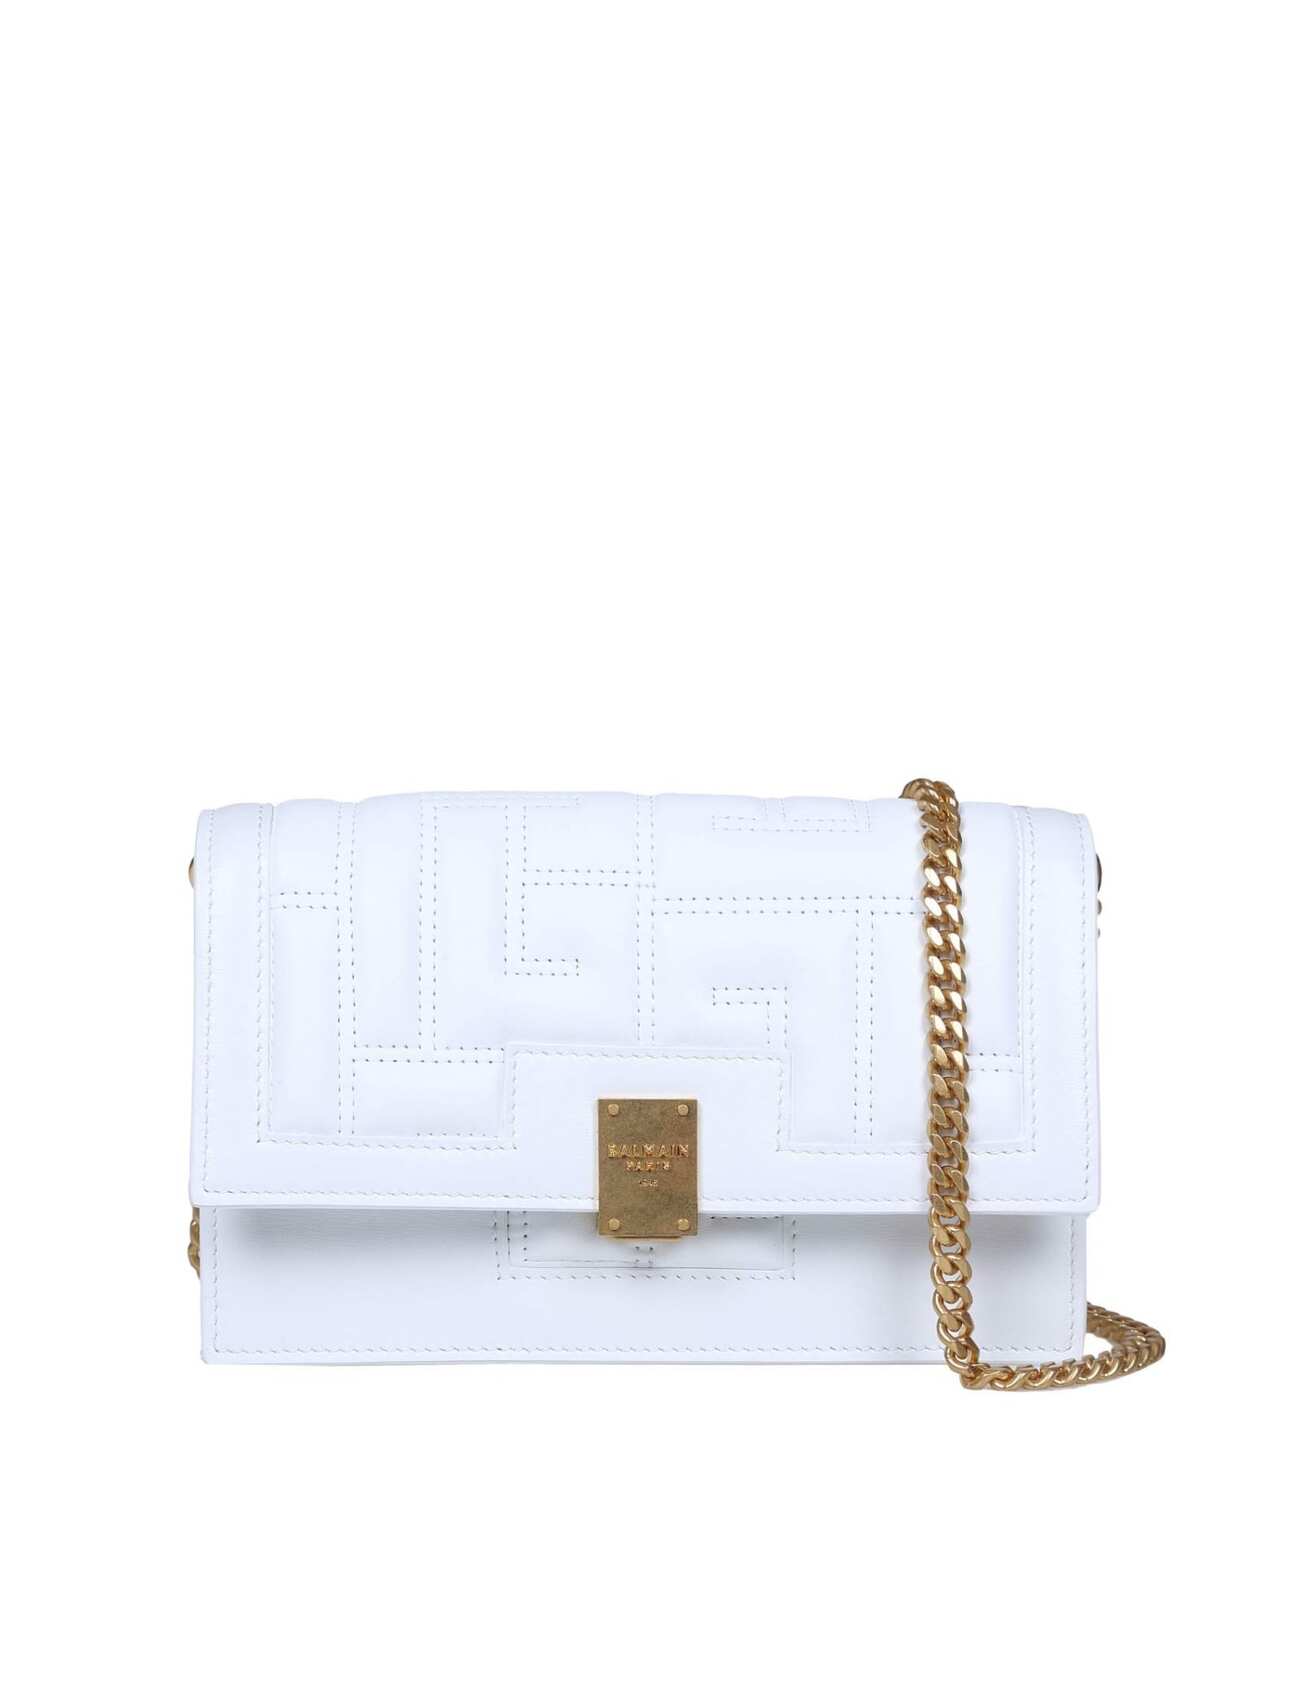 Balmain Flap Bag Mini In Quilted Leather in white